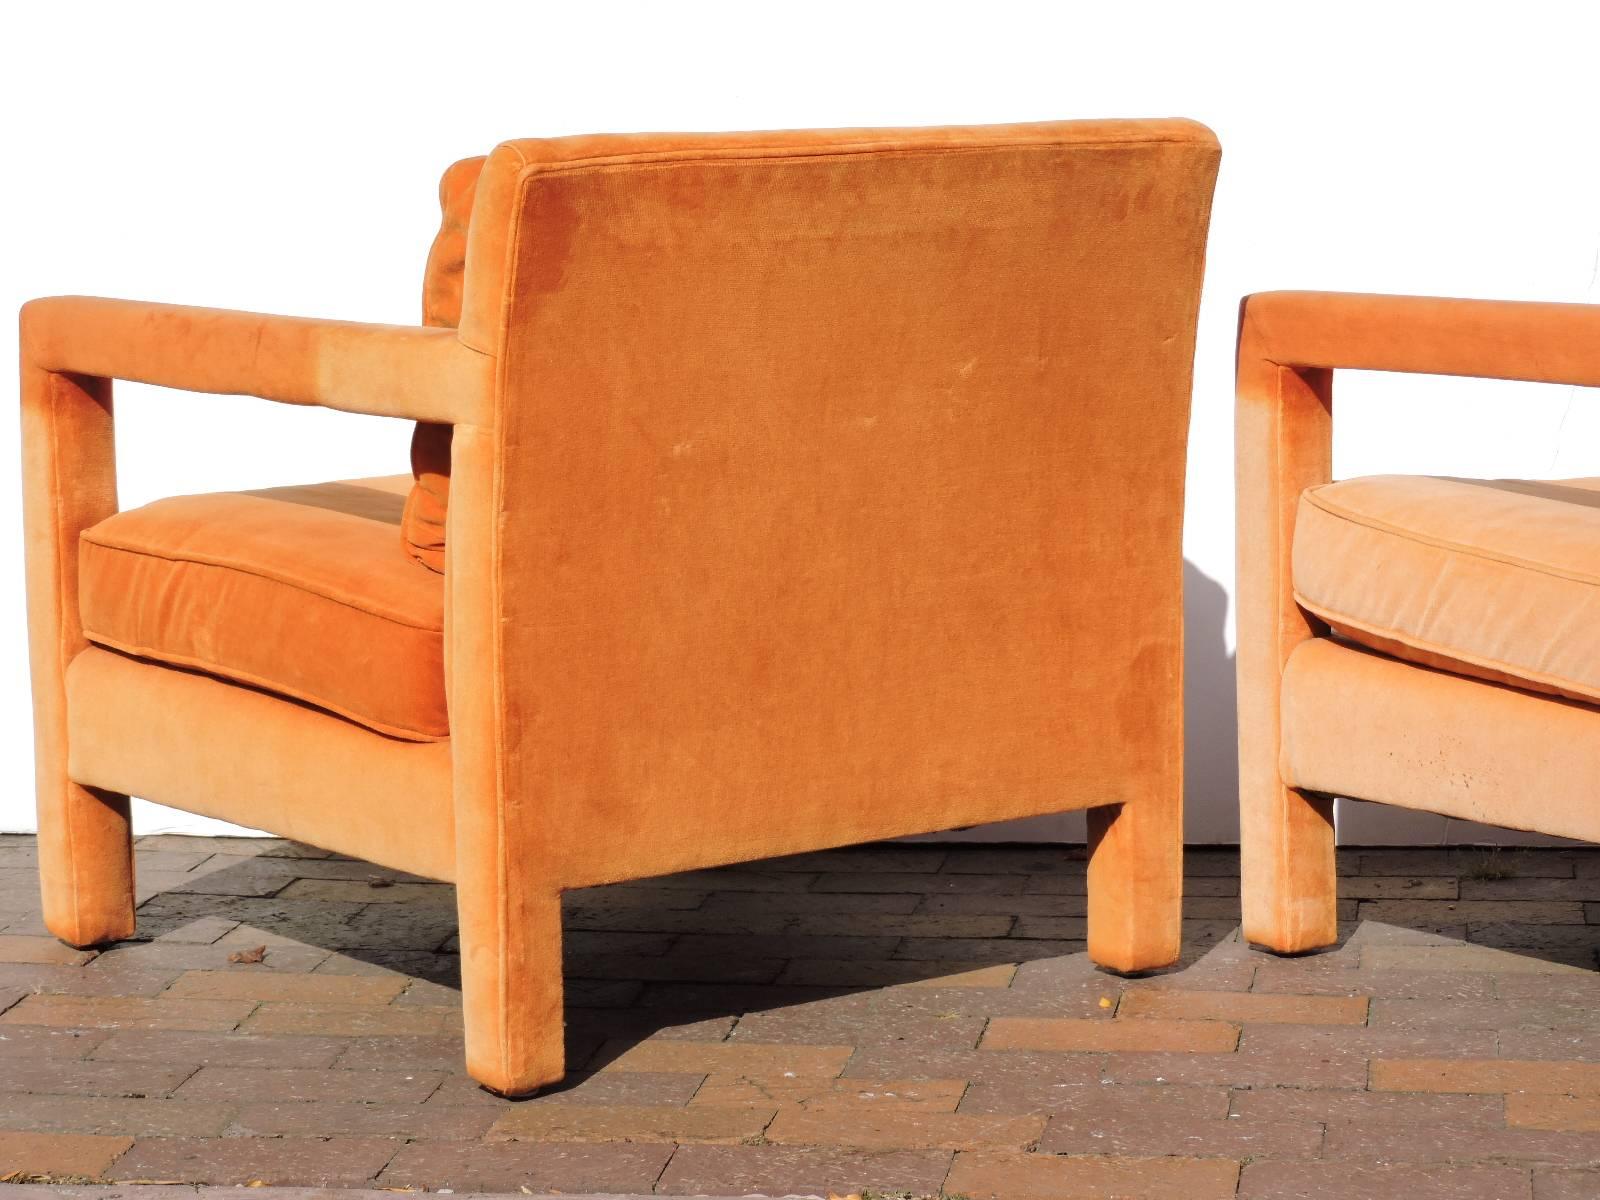 20th Century Orange Upholstered Parsons Lounge Chairs in the style of Milo Baughman 